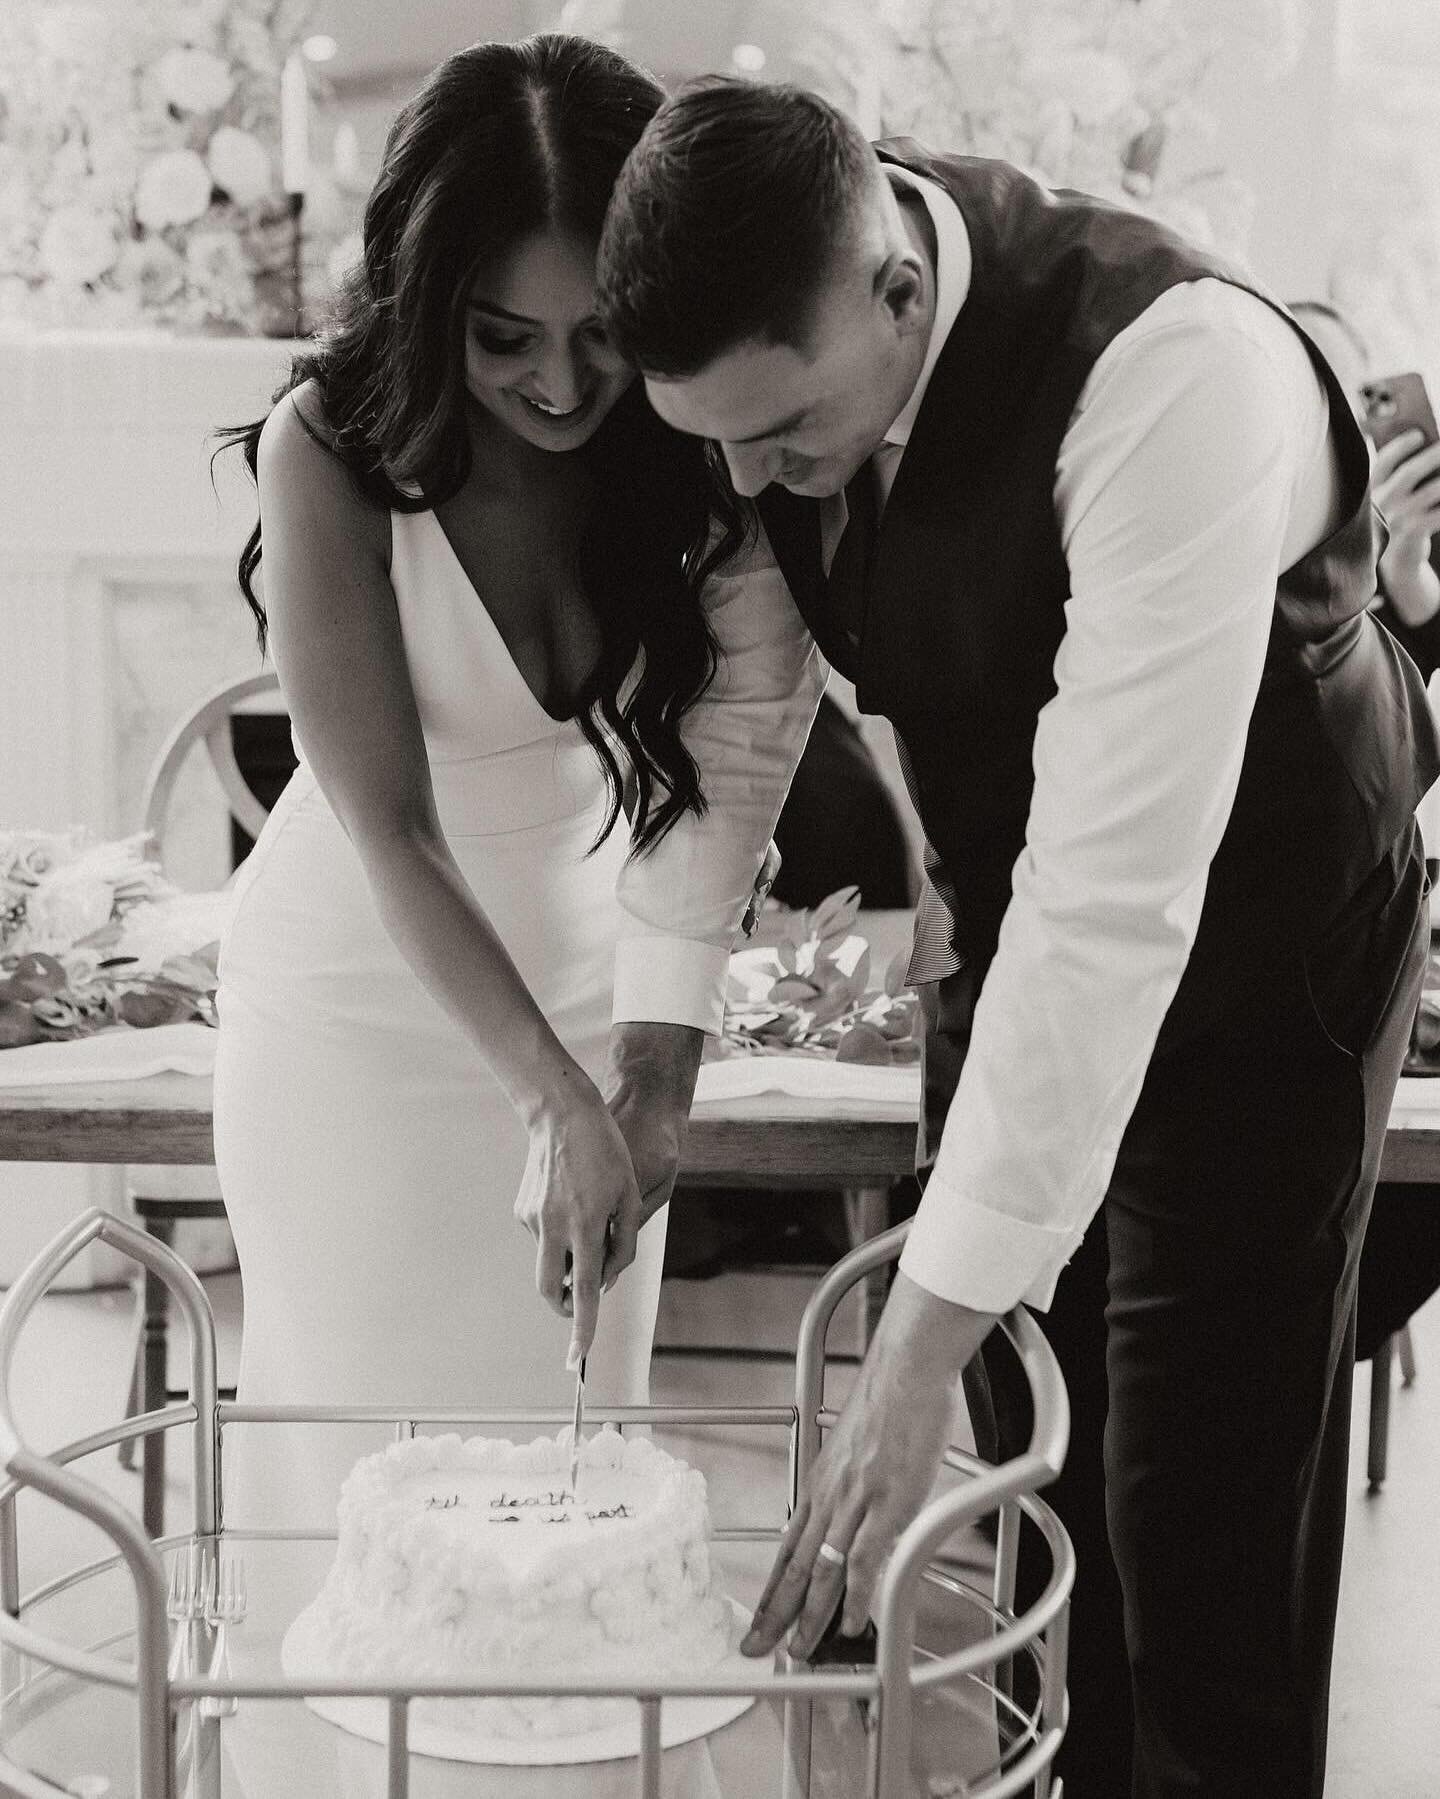 Working with Matt and Mariah was a full circle moment! We met Mariah at our first bridal show hosted by @blushmagazineca in 2022. From that moment, M&amp;M envisioned their dream day&mdash;a simple vintage cake to share, and they chose our Strawberry